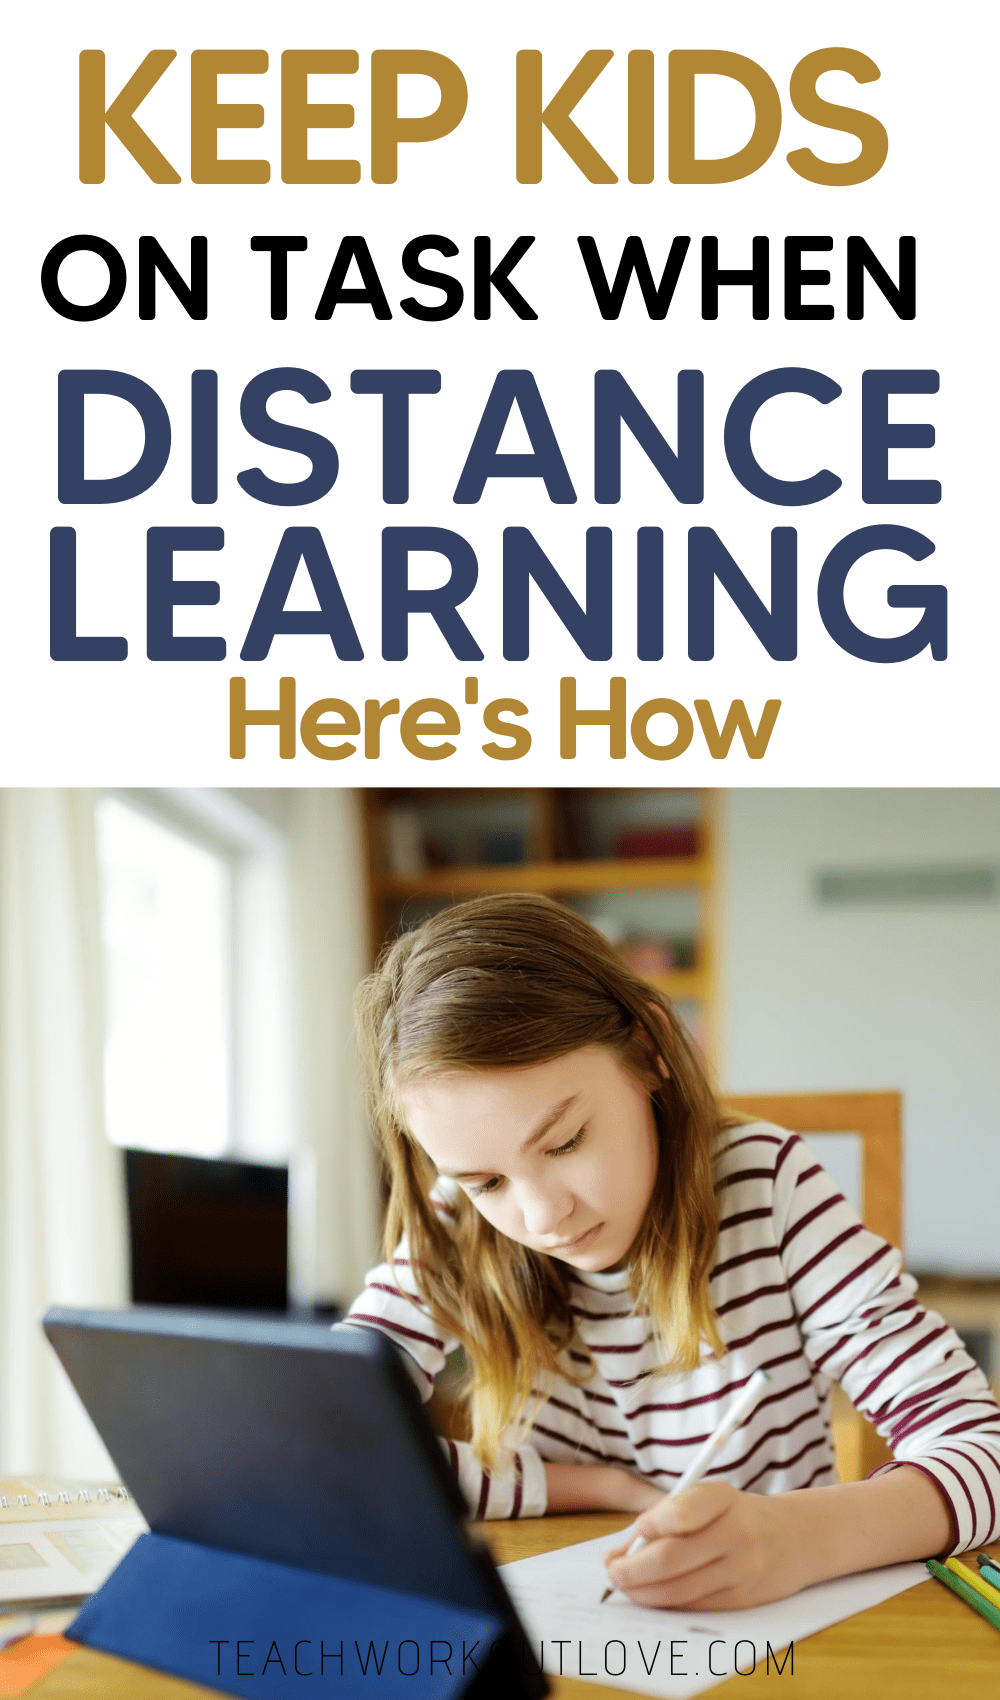 Distance learning is a reality for many families right now. Here are tips and tricks for how to keep students on task when distance learning.